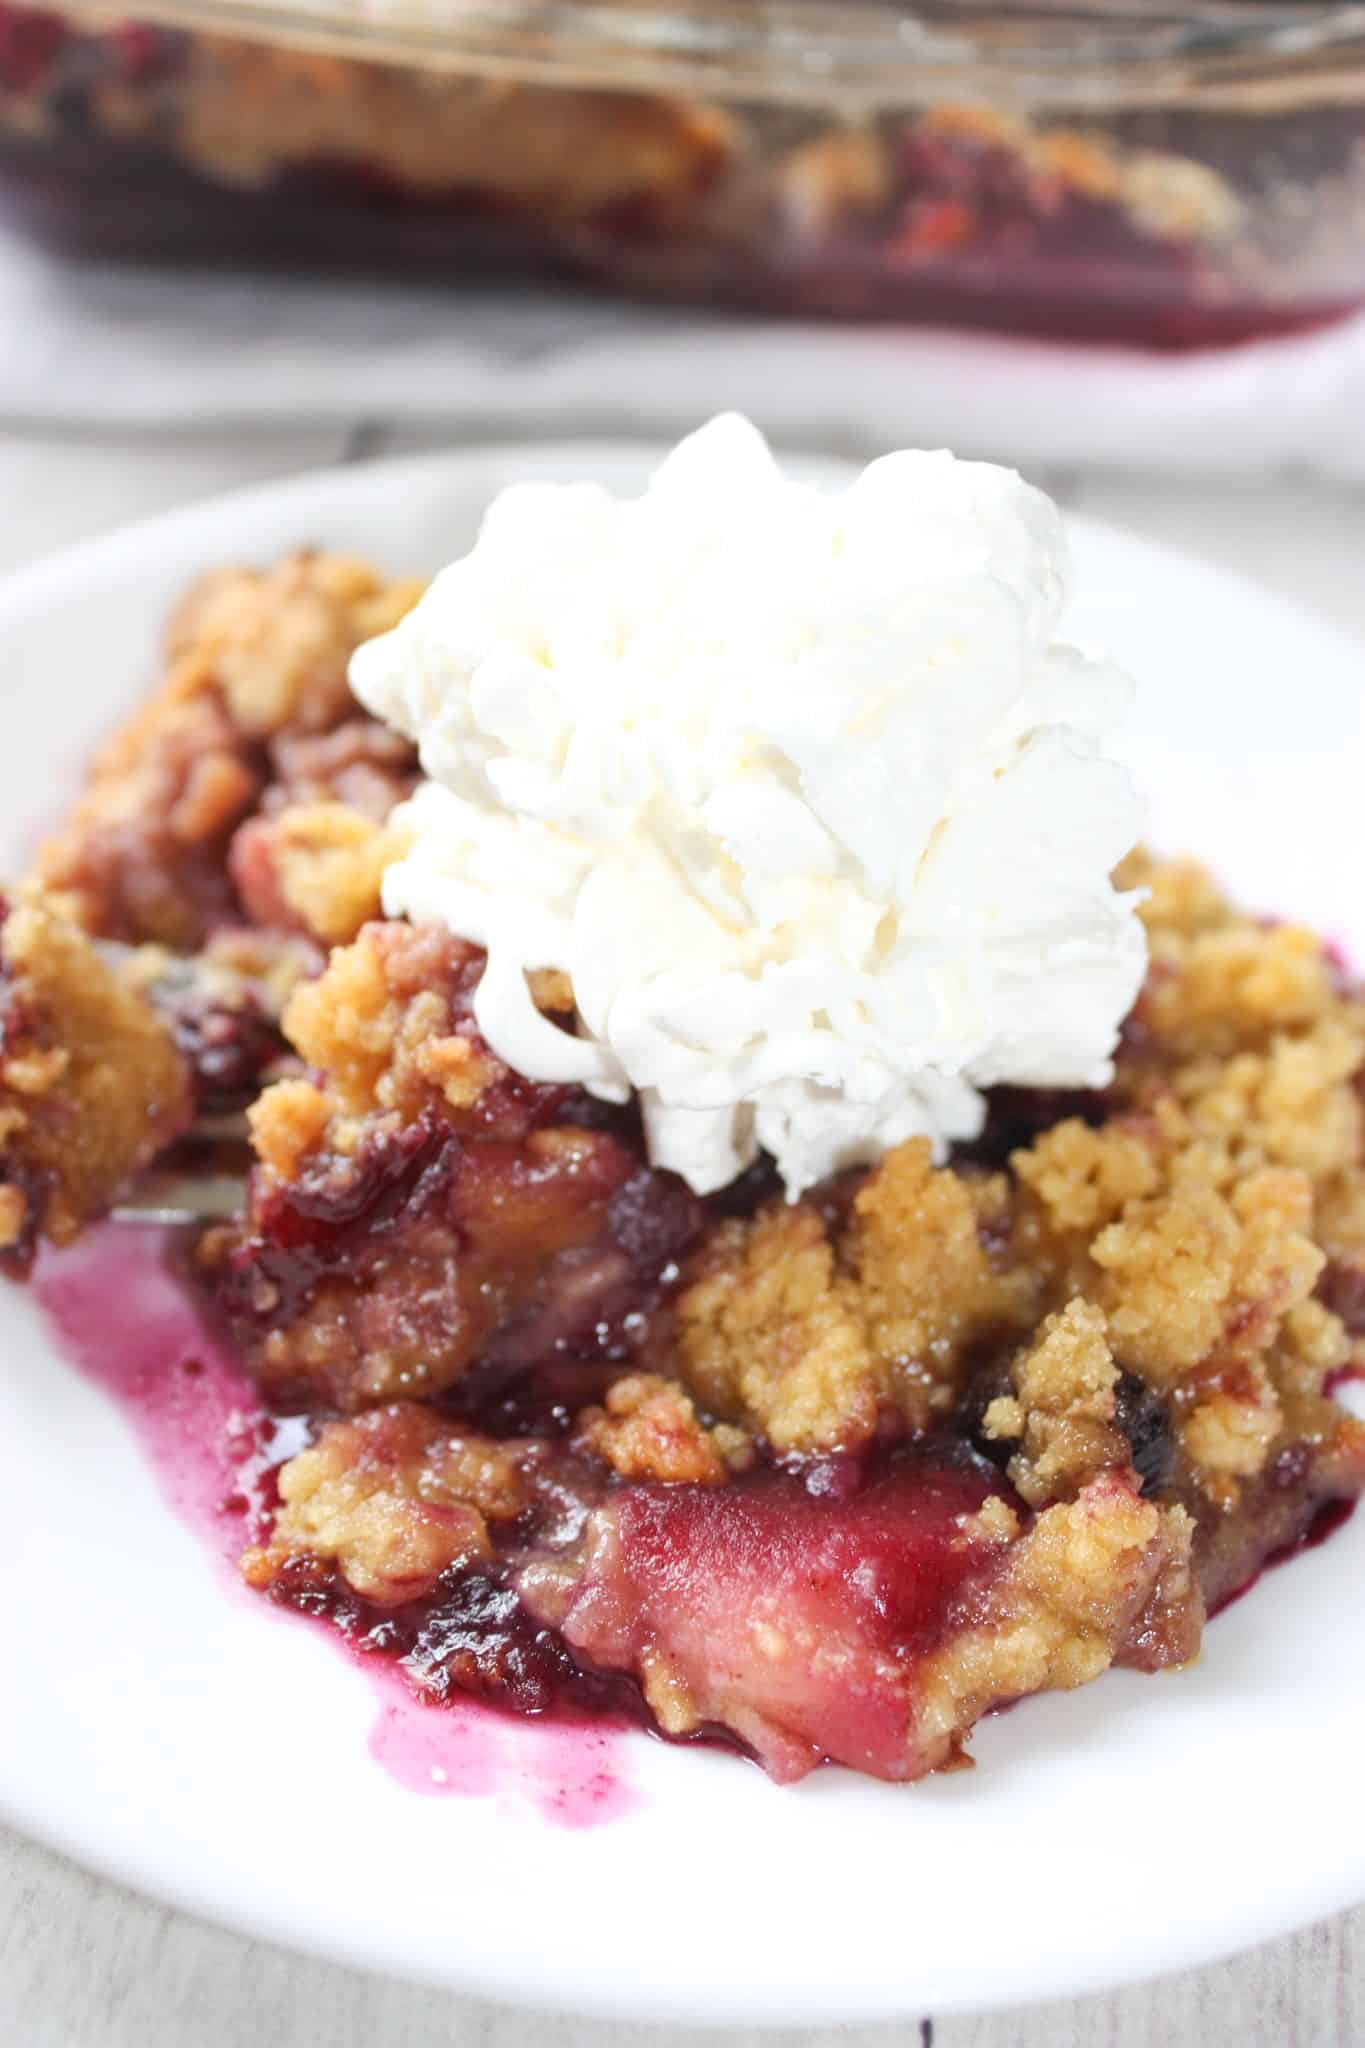 Every summer I eagerly await the arrival of fresh blueberries!  No one else in my family feels the same way about them as I do so I have to mix them with another fruit.  Gluten Free Blueberry Apple Crumble is a delcious blend of these two fruits.